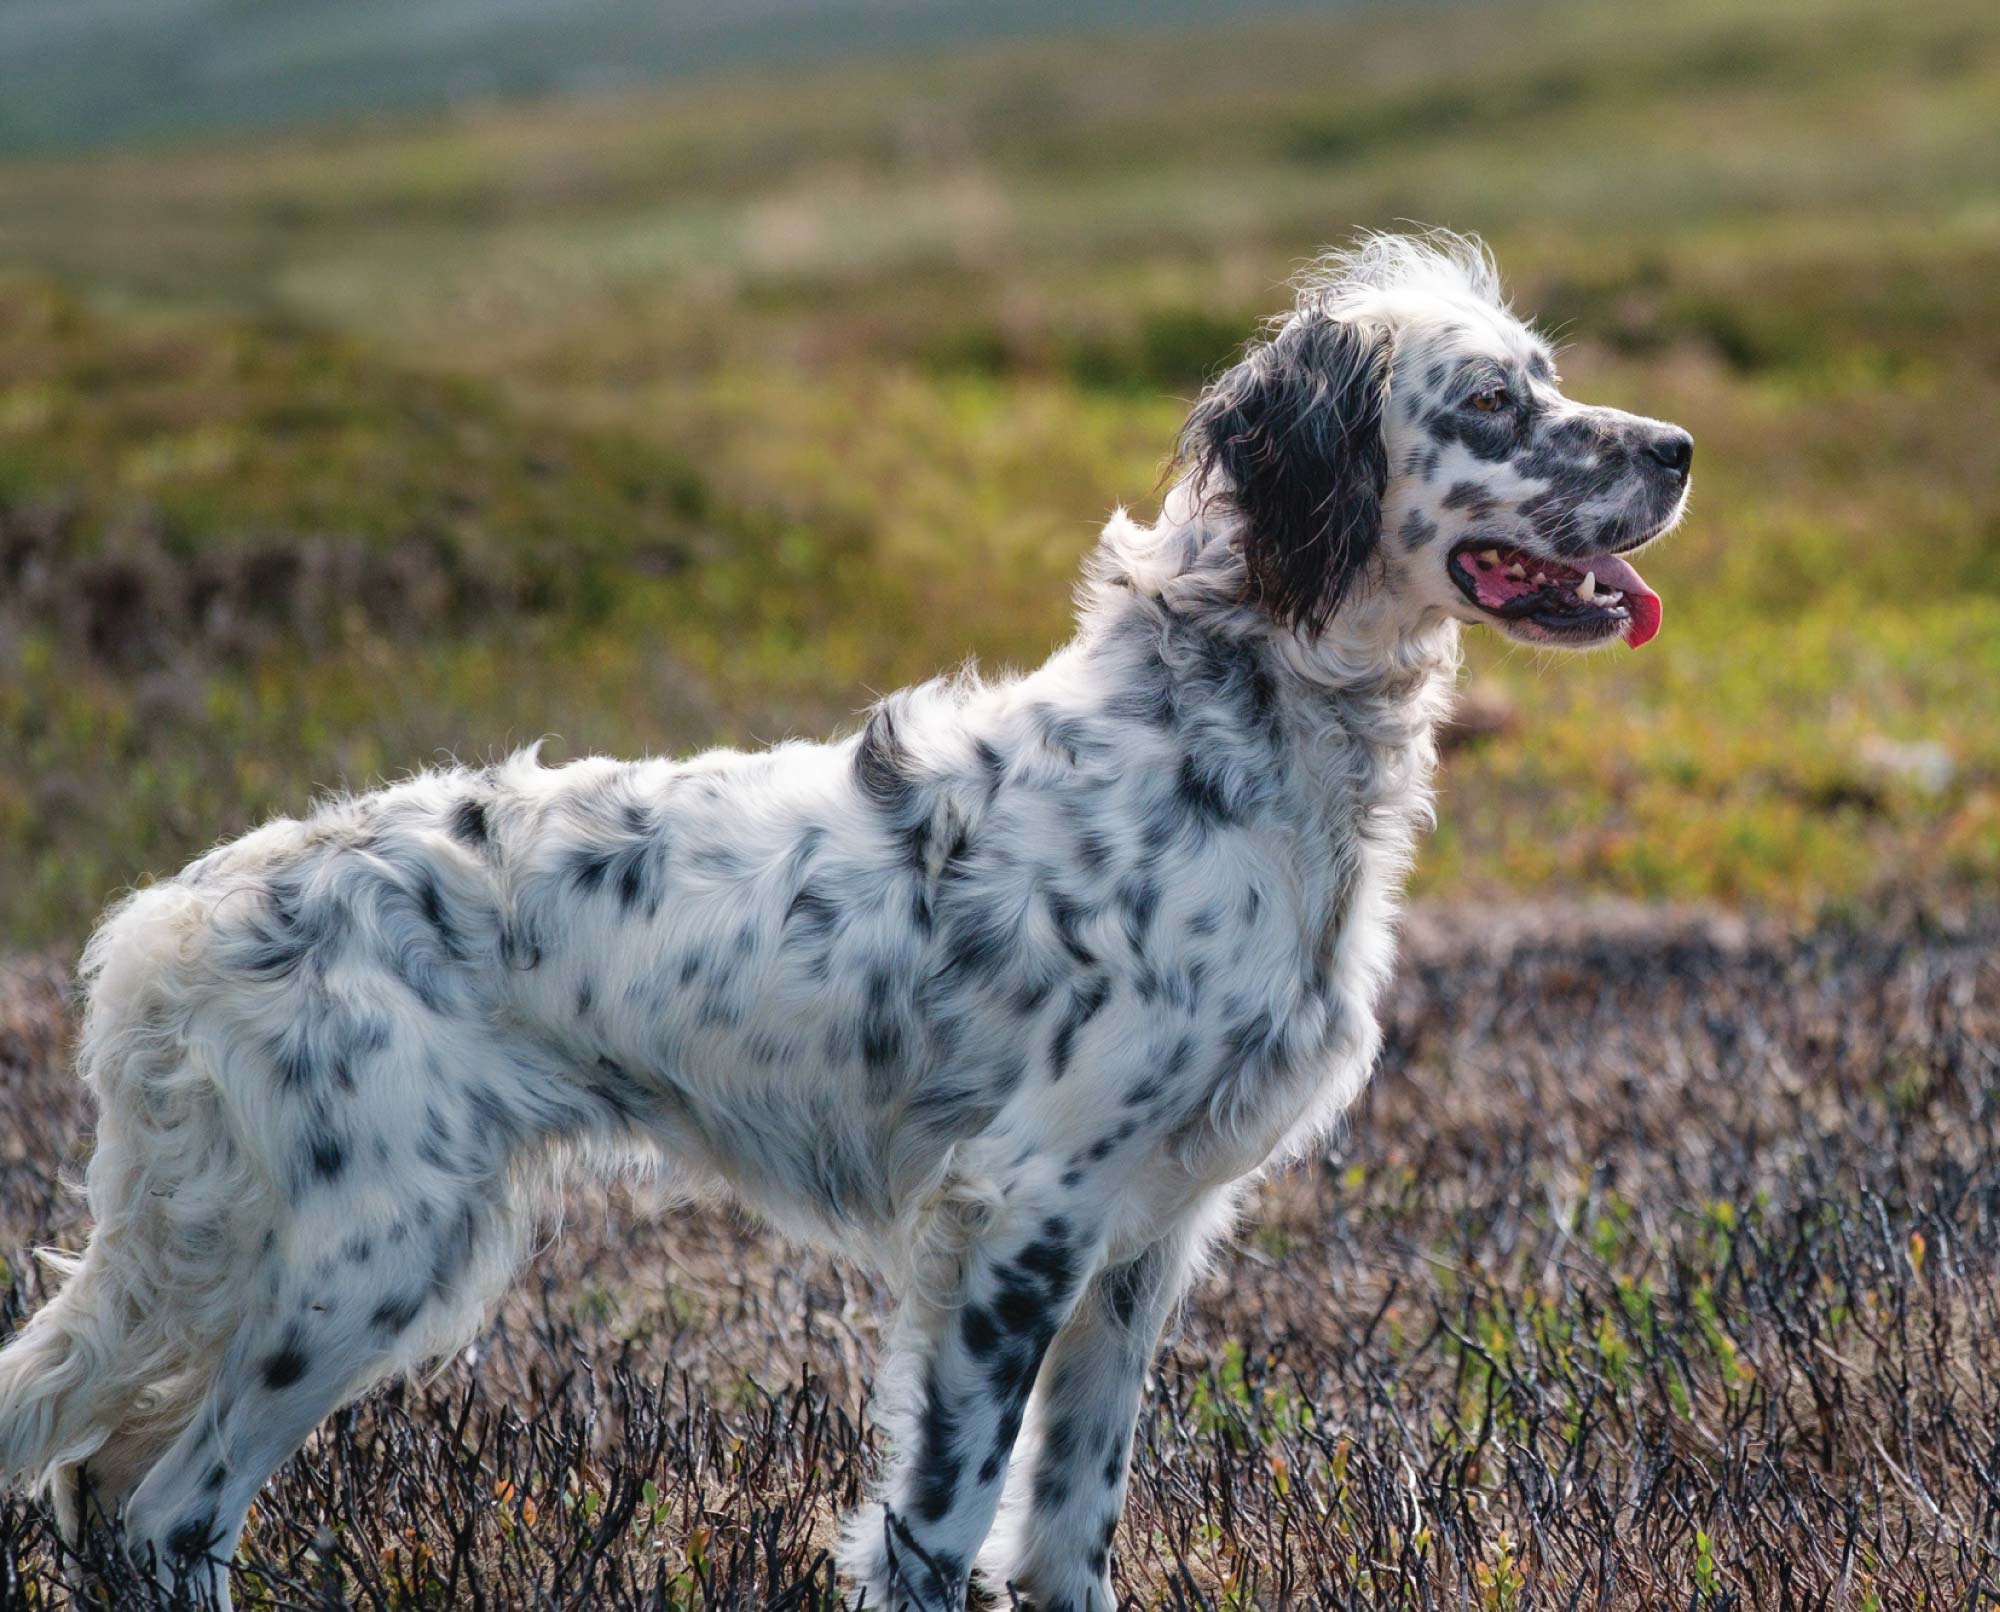 How English is the English Setter? Project Upland Magazine